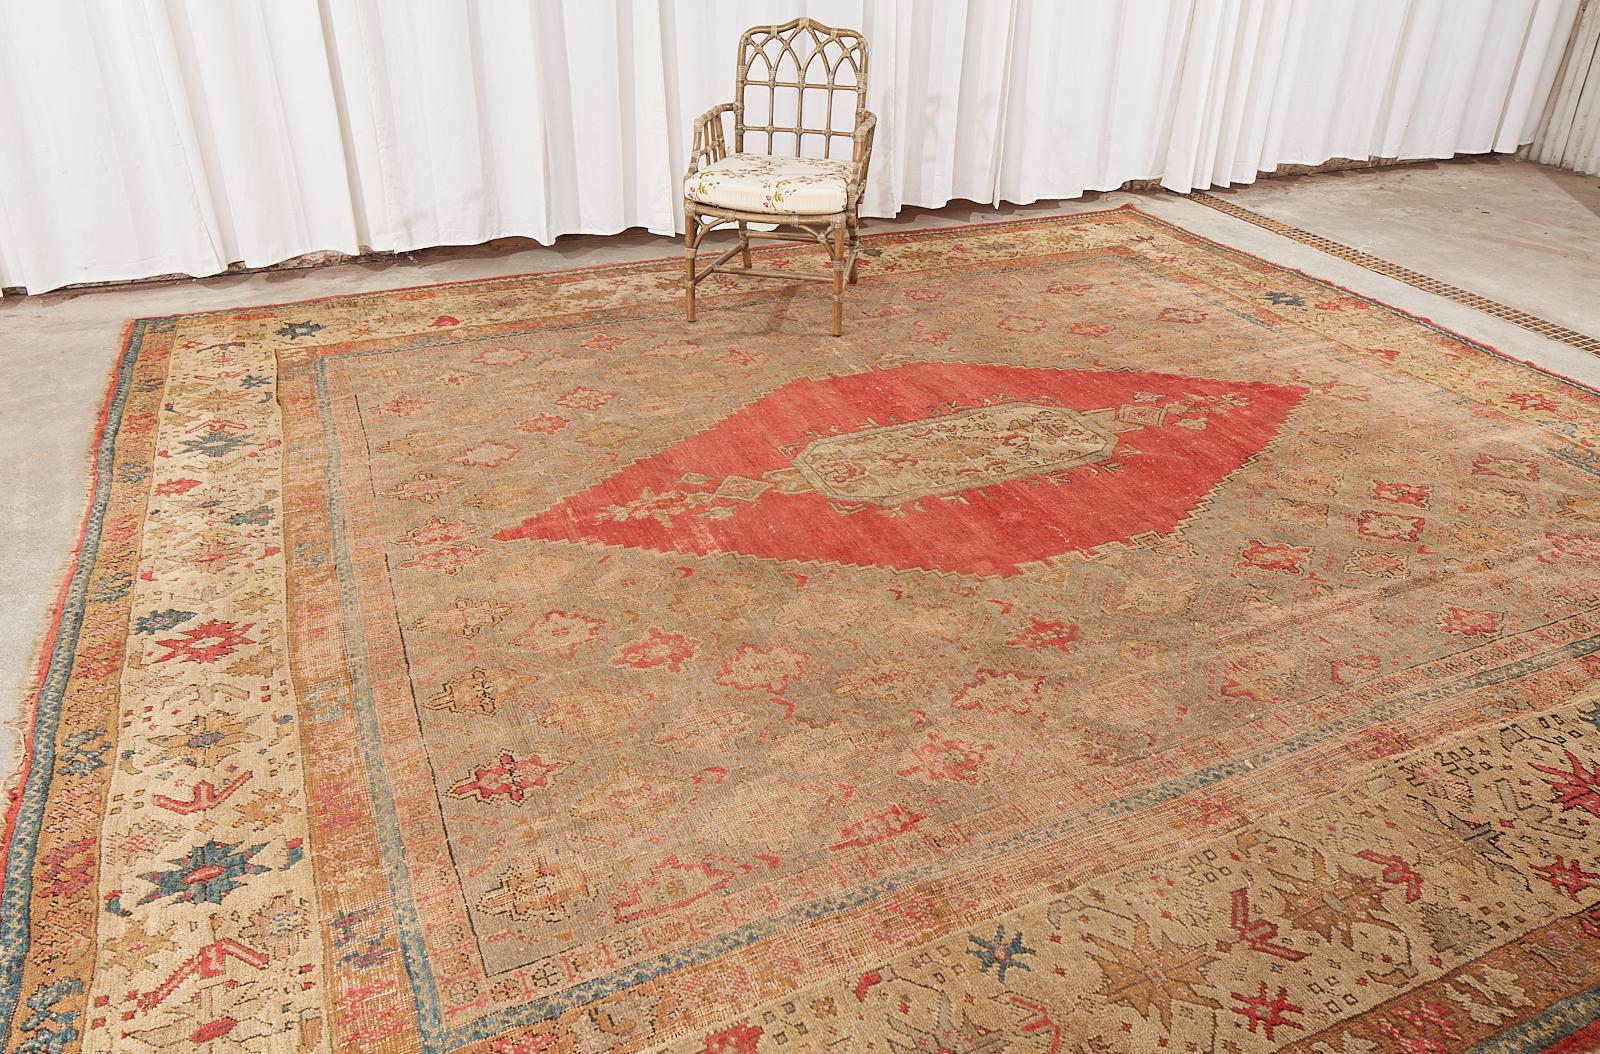 Dramatic late 19th century hand-knotted wool oushak rug featuring a rectangular center in a diamond shaped crimson red medallion. Aged, distressed patina with past alteration to make the current size in a near square shape.